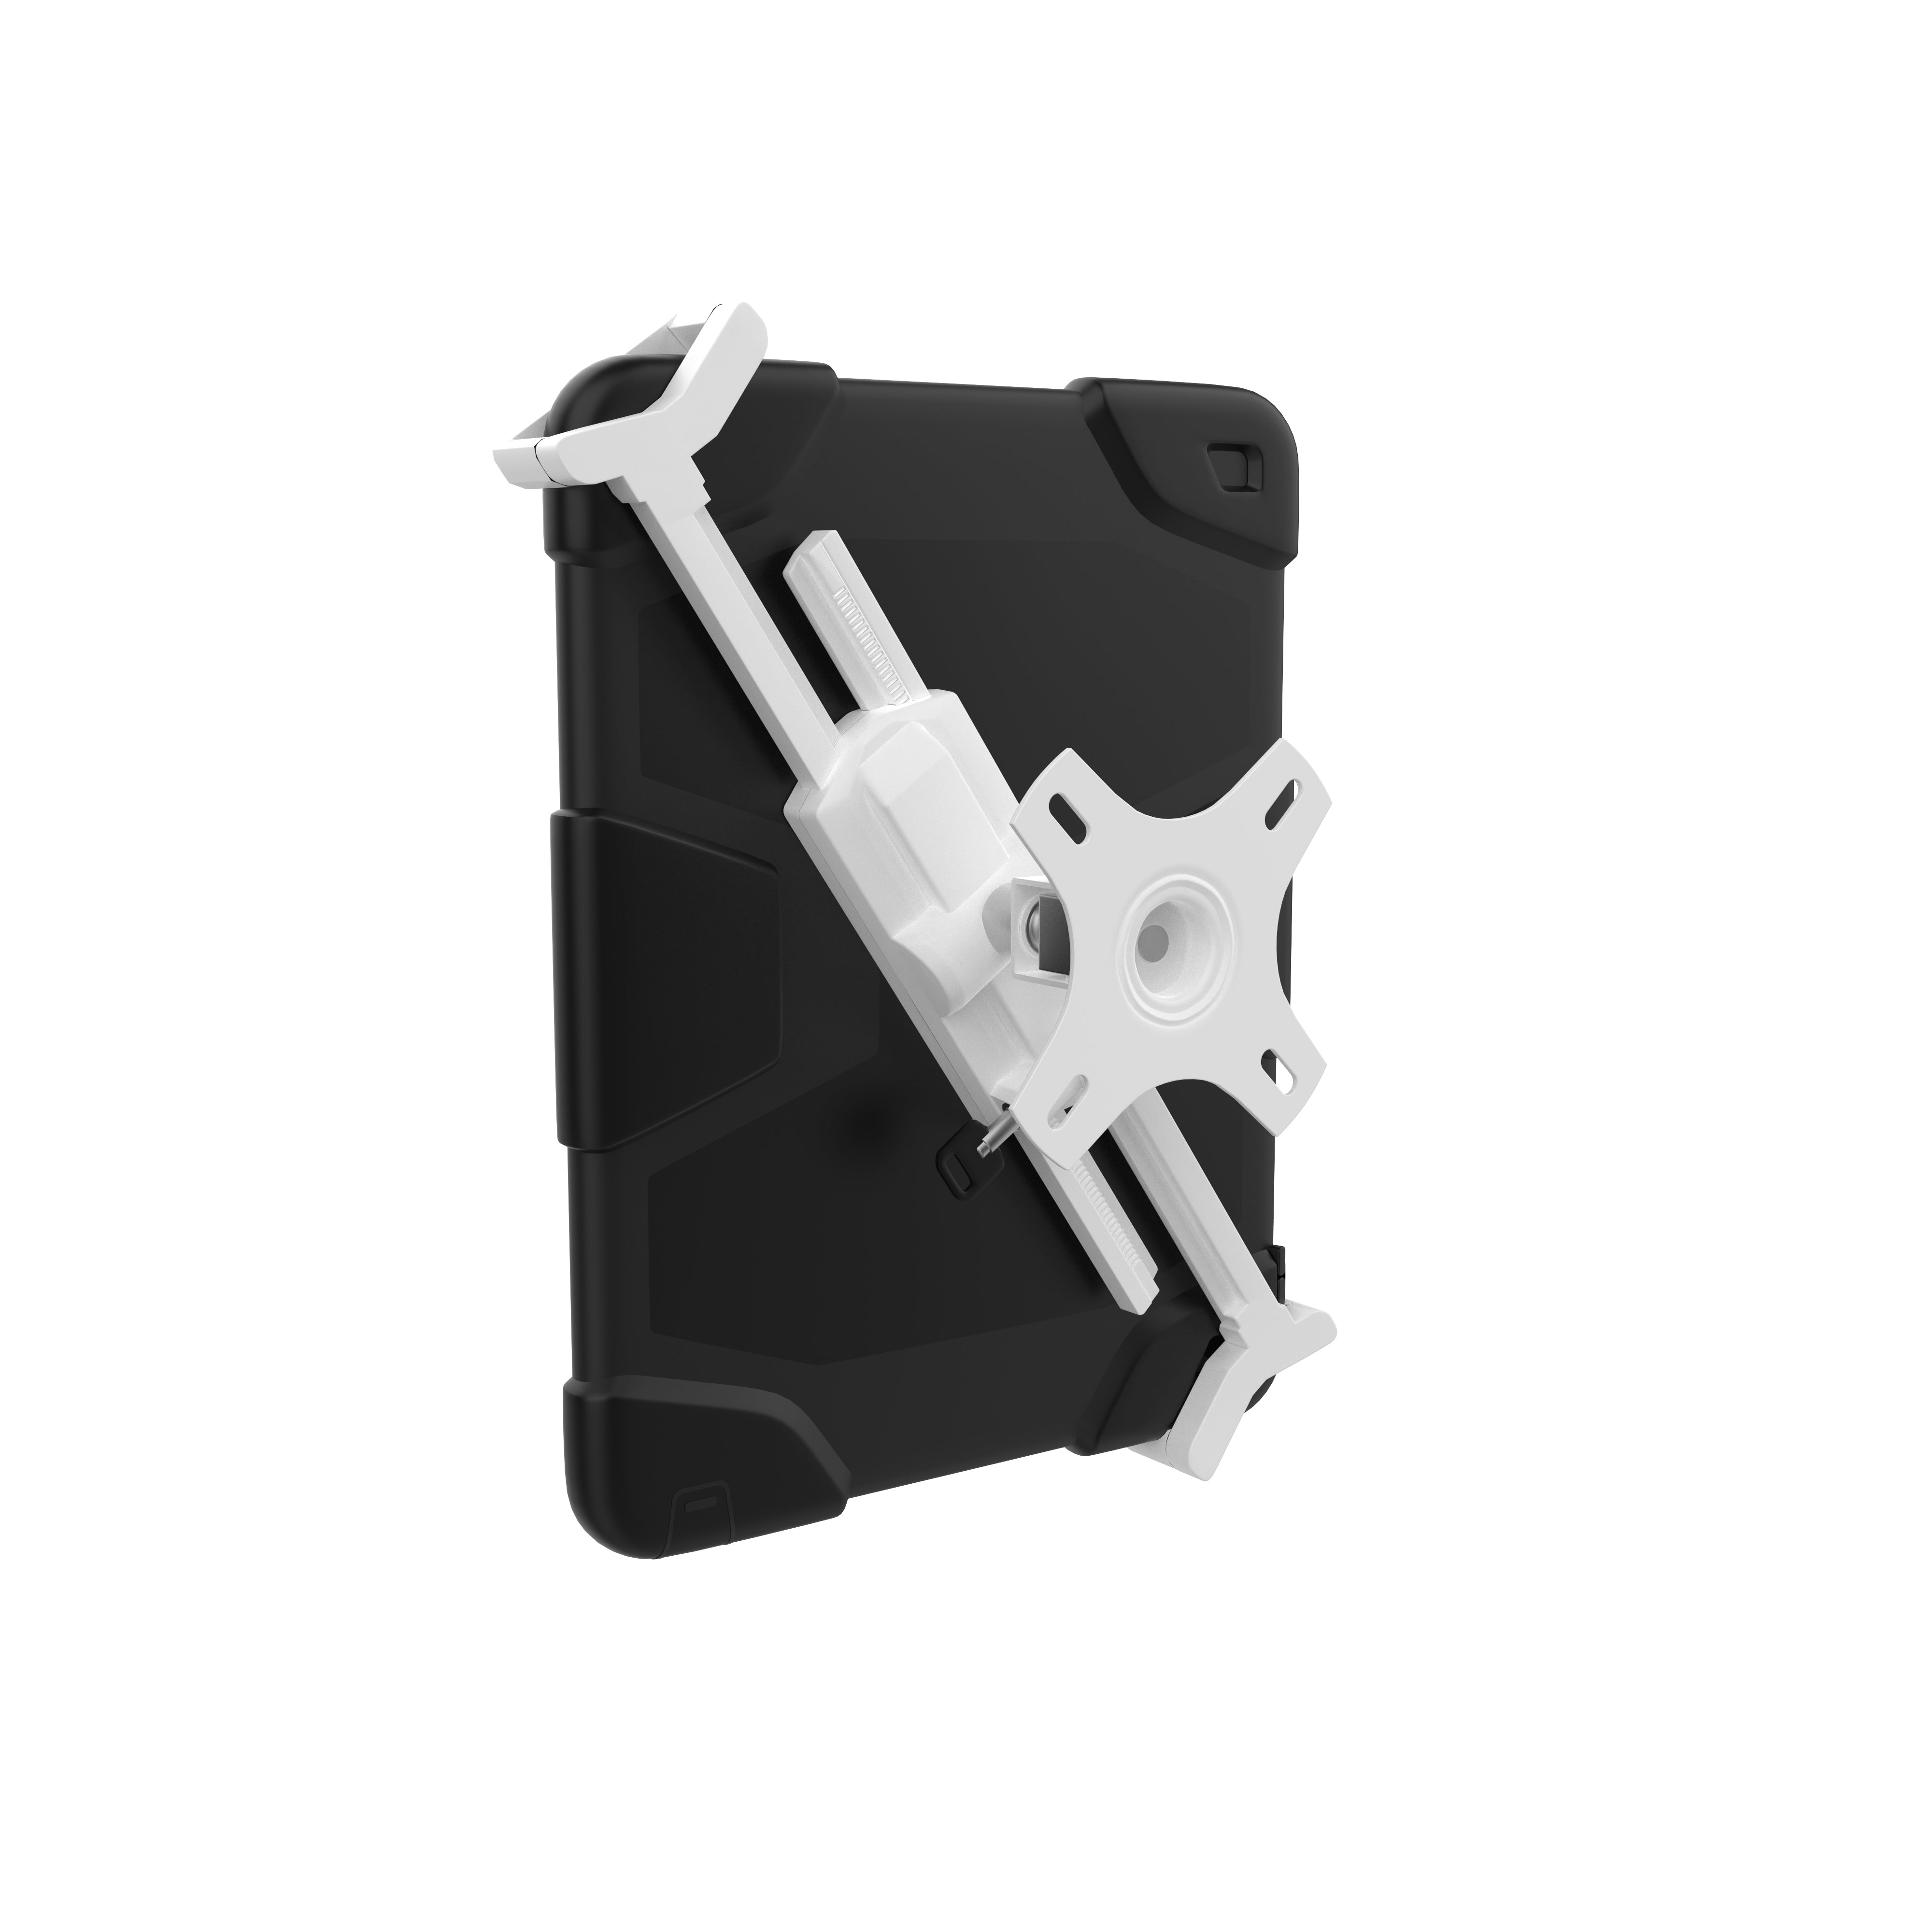 Security VESA and Wall Mount for 7-14 Inch Tablets, including the iPad 10.2-Inch (7th/ 8th/ 9th Gen.)